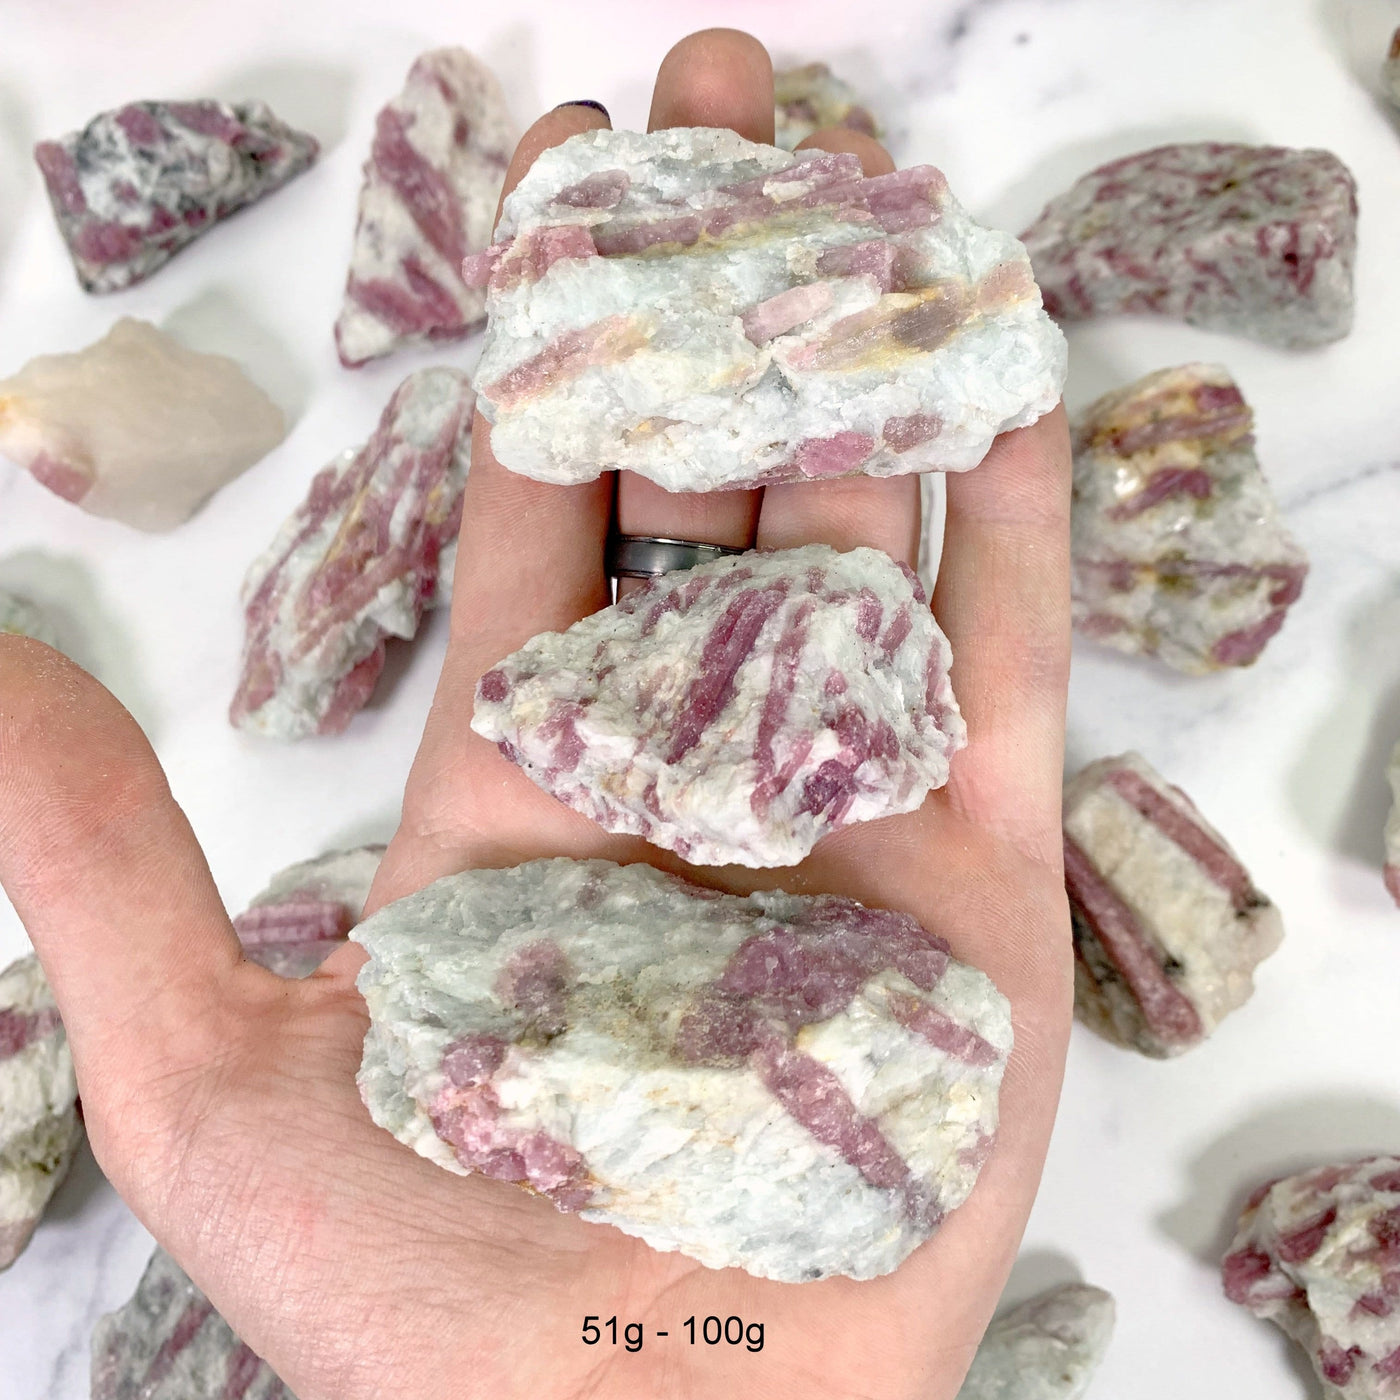 atural Pink Tourmaline with Mica on Matrix - 3 in a hand